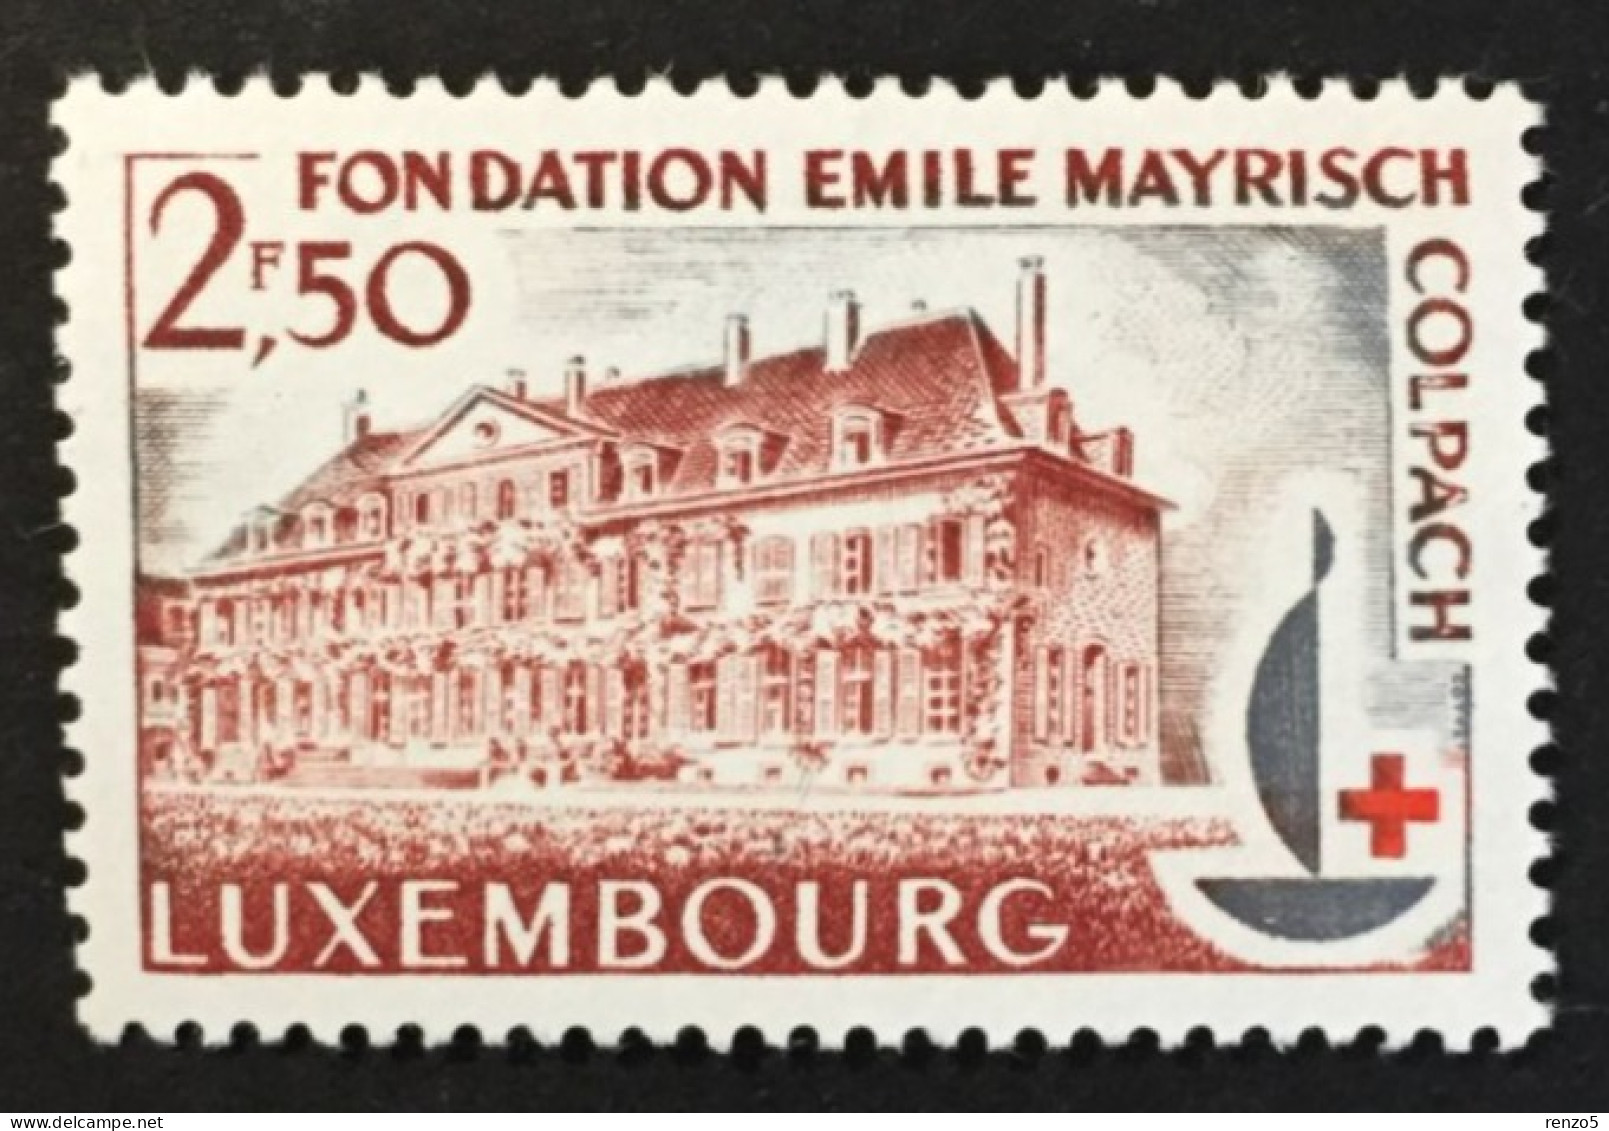 1963 Luxembourg - Colpach Castle And The Centenary Emblem Red Cross - Unused ( Imperfect Gum ) - Neufs